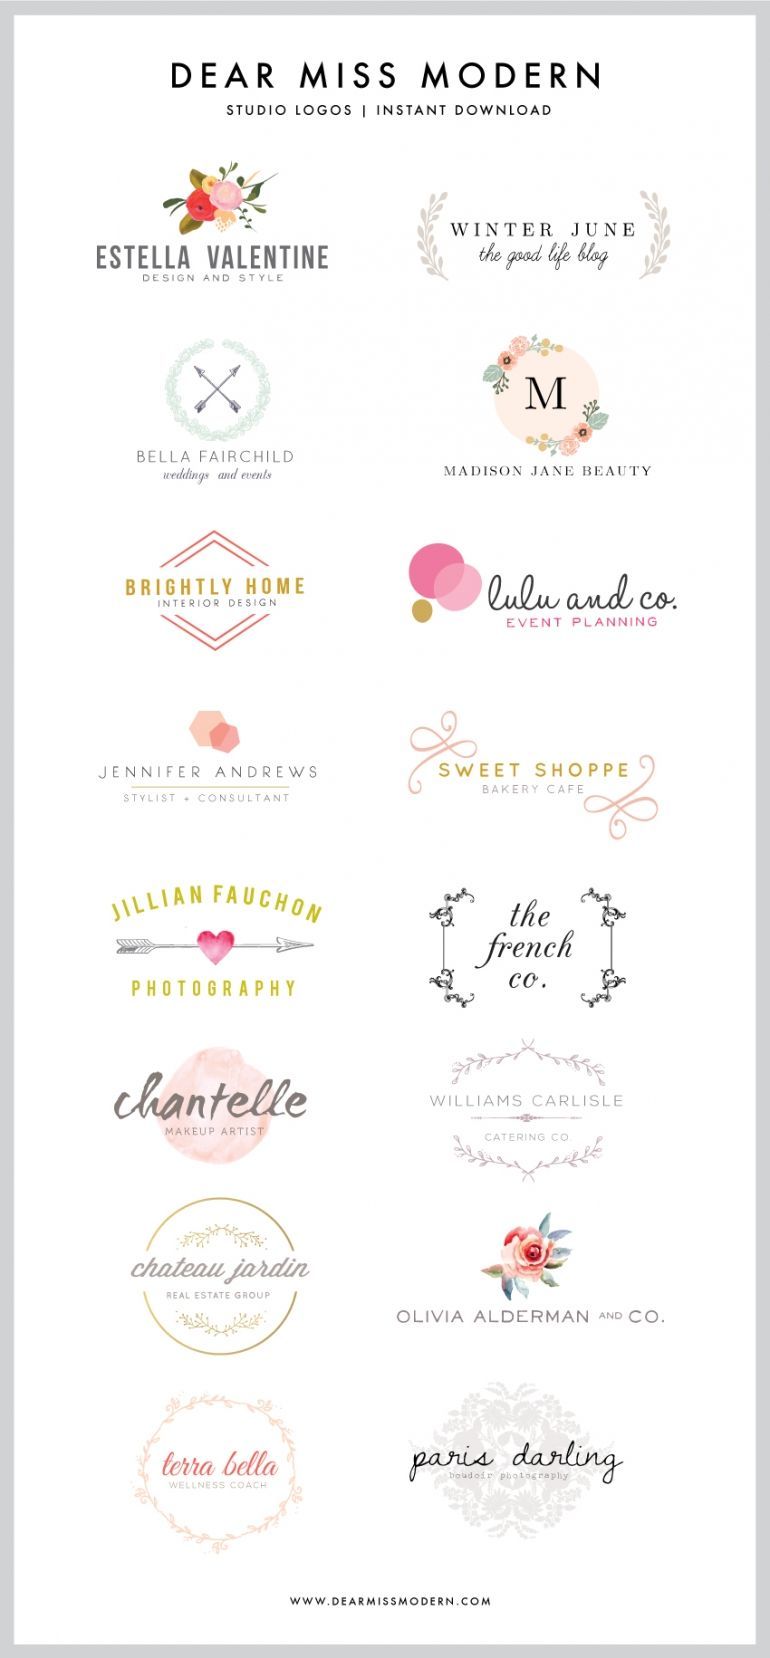 Adorable business logos by Dear Miss Modern Instant Logos